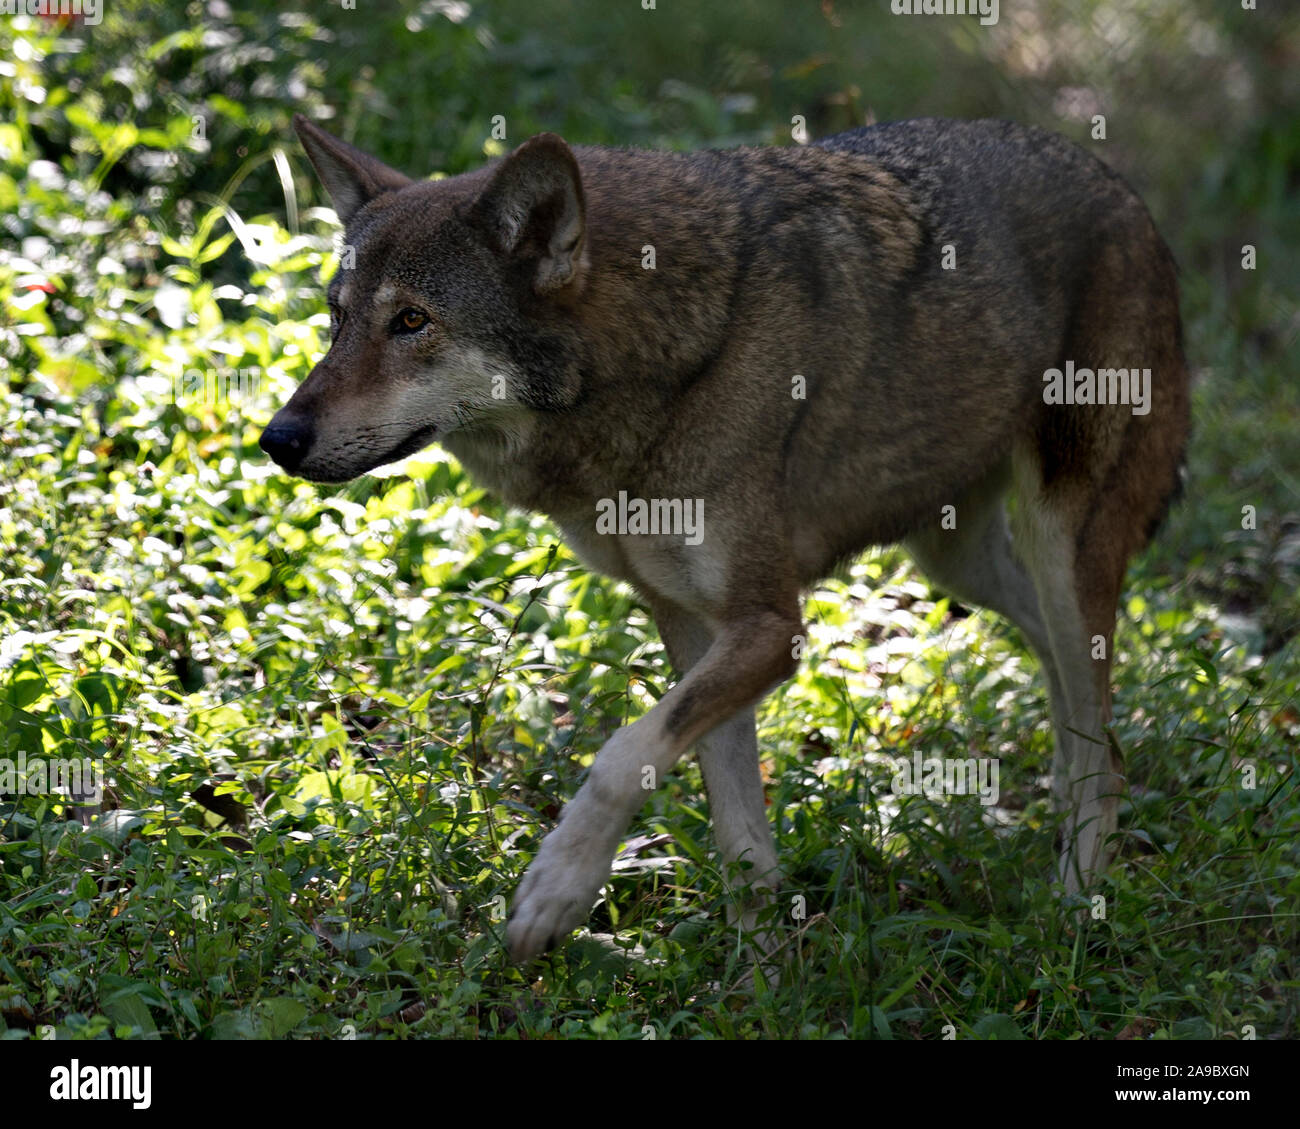 Wolf (Red Wolf) walking in the field with a close up viewing of its body, head, ears, eyes, nose, paws in its environment and surrounding. Stock Photo